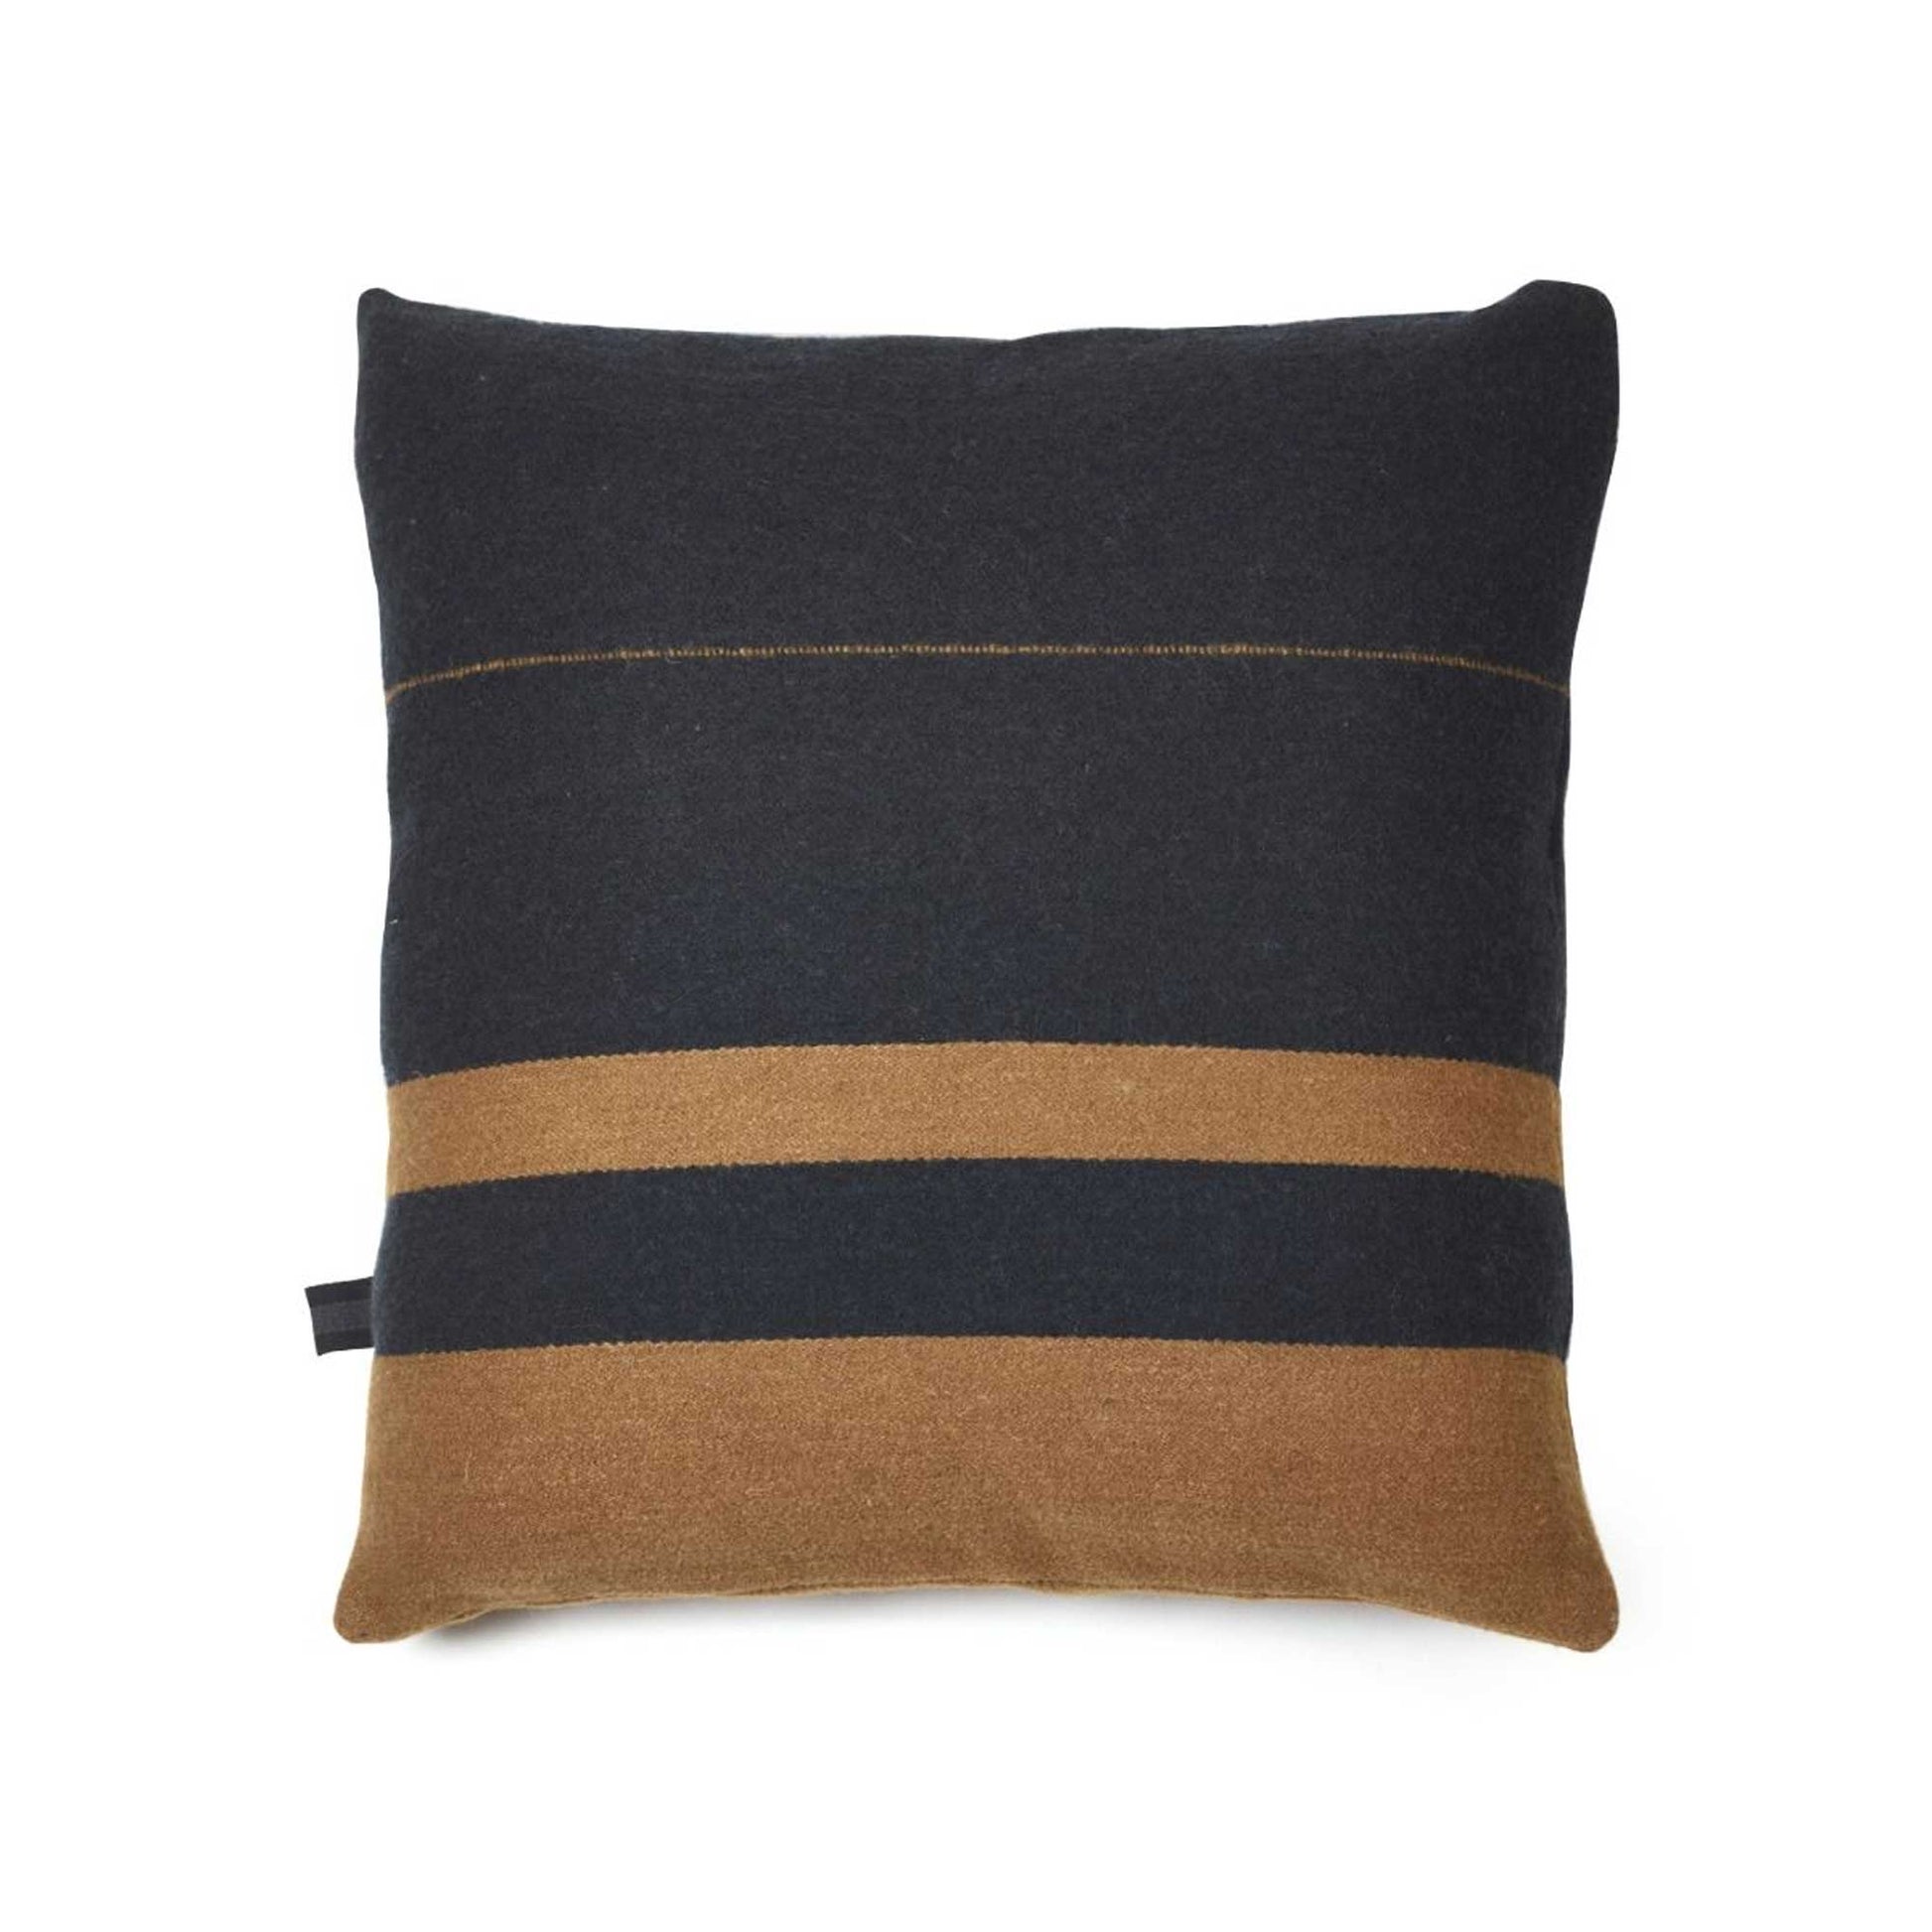 Linen and wool blend throw pillow cover flat lay product shot in color Oscar by Libeco for South Hous.